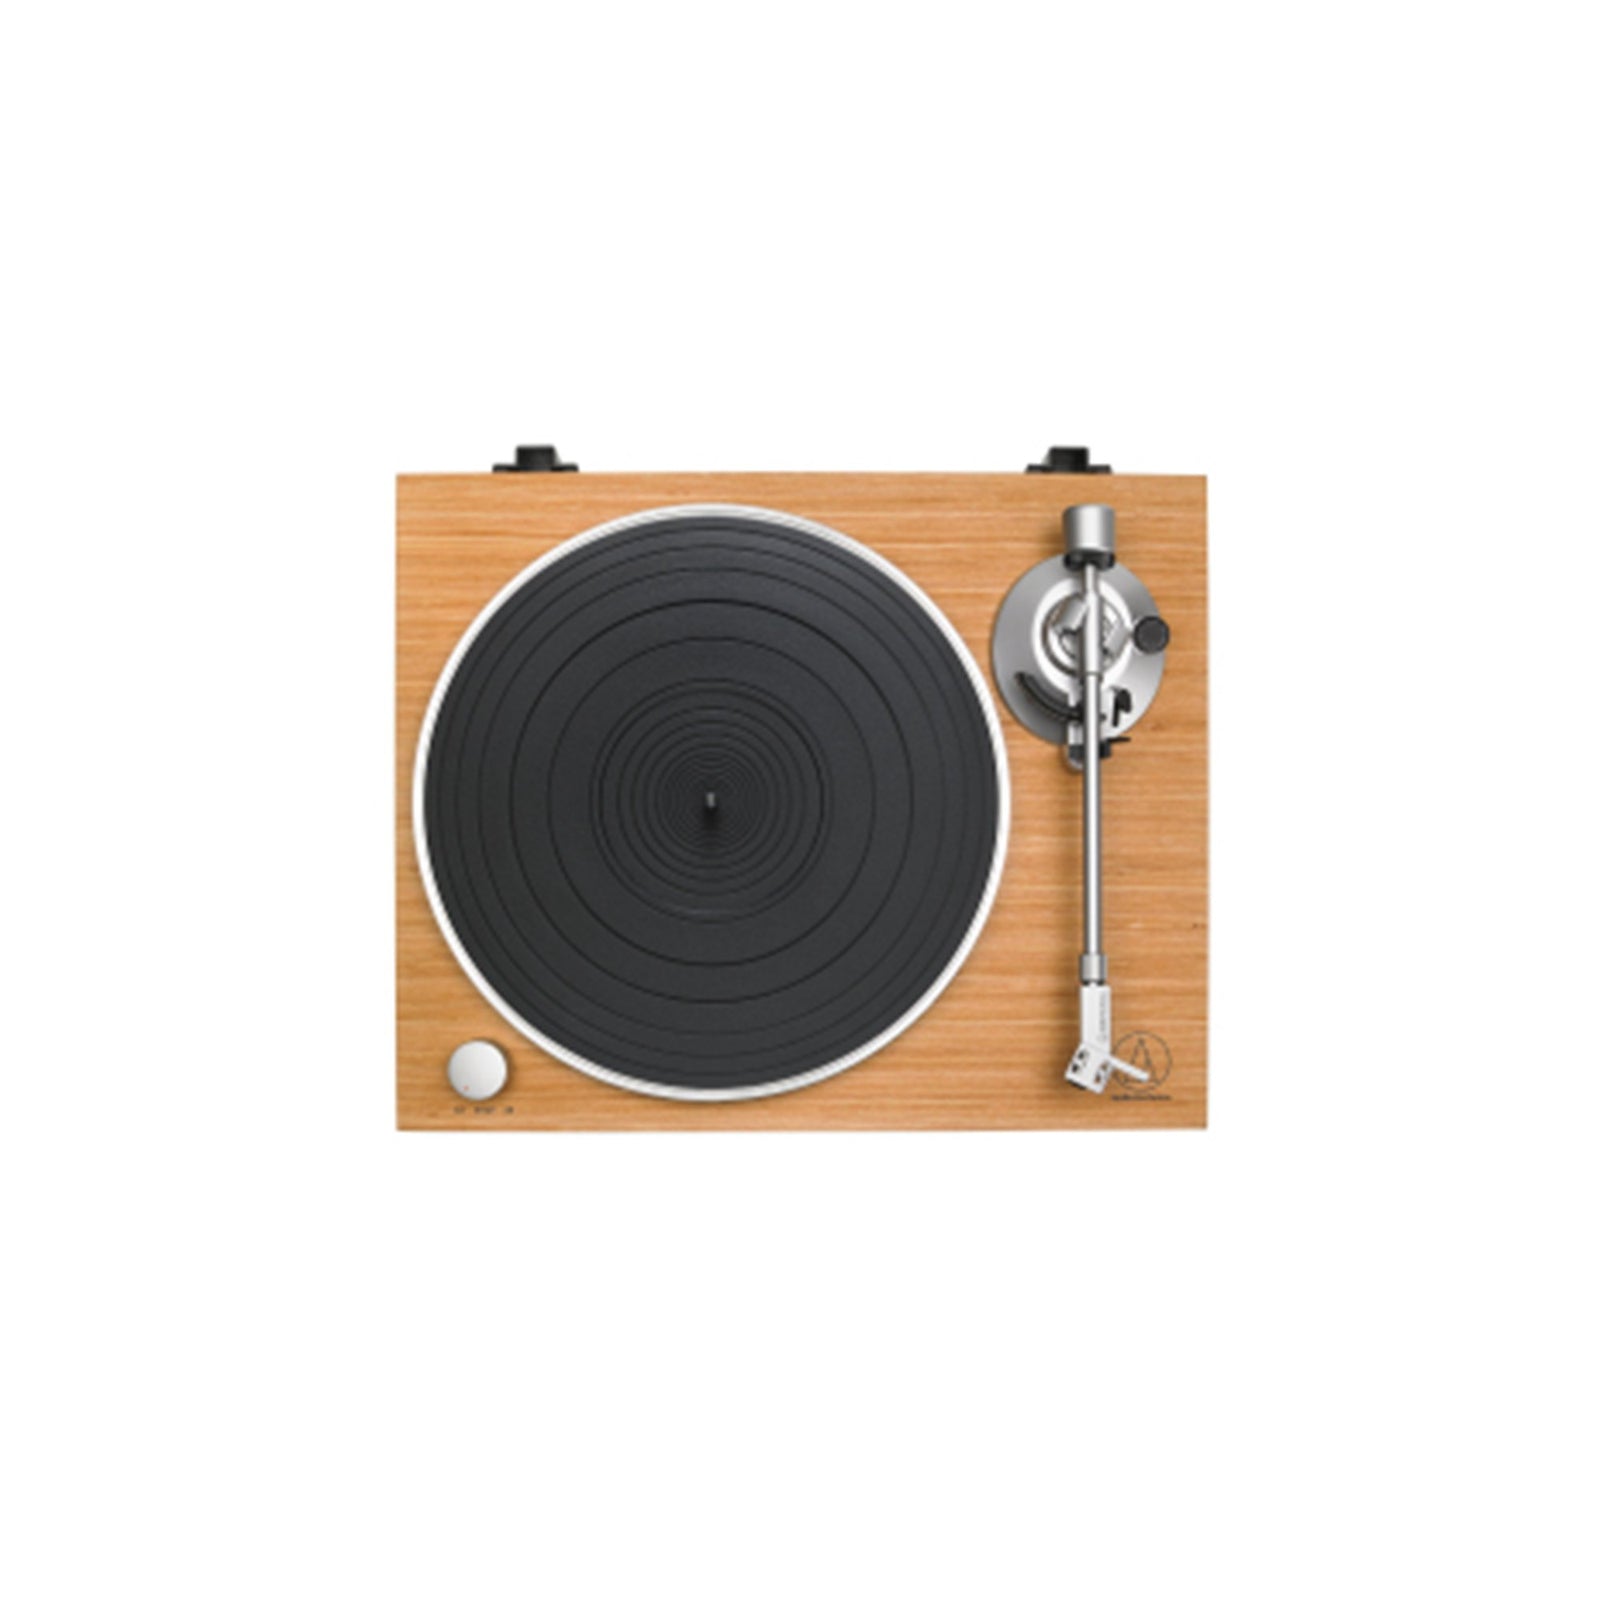 Audio-Technica AT-LPW30TK Fully Manual Belt-Drive Turntable top